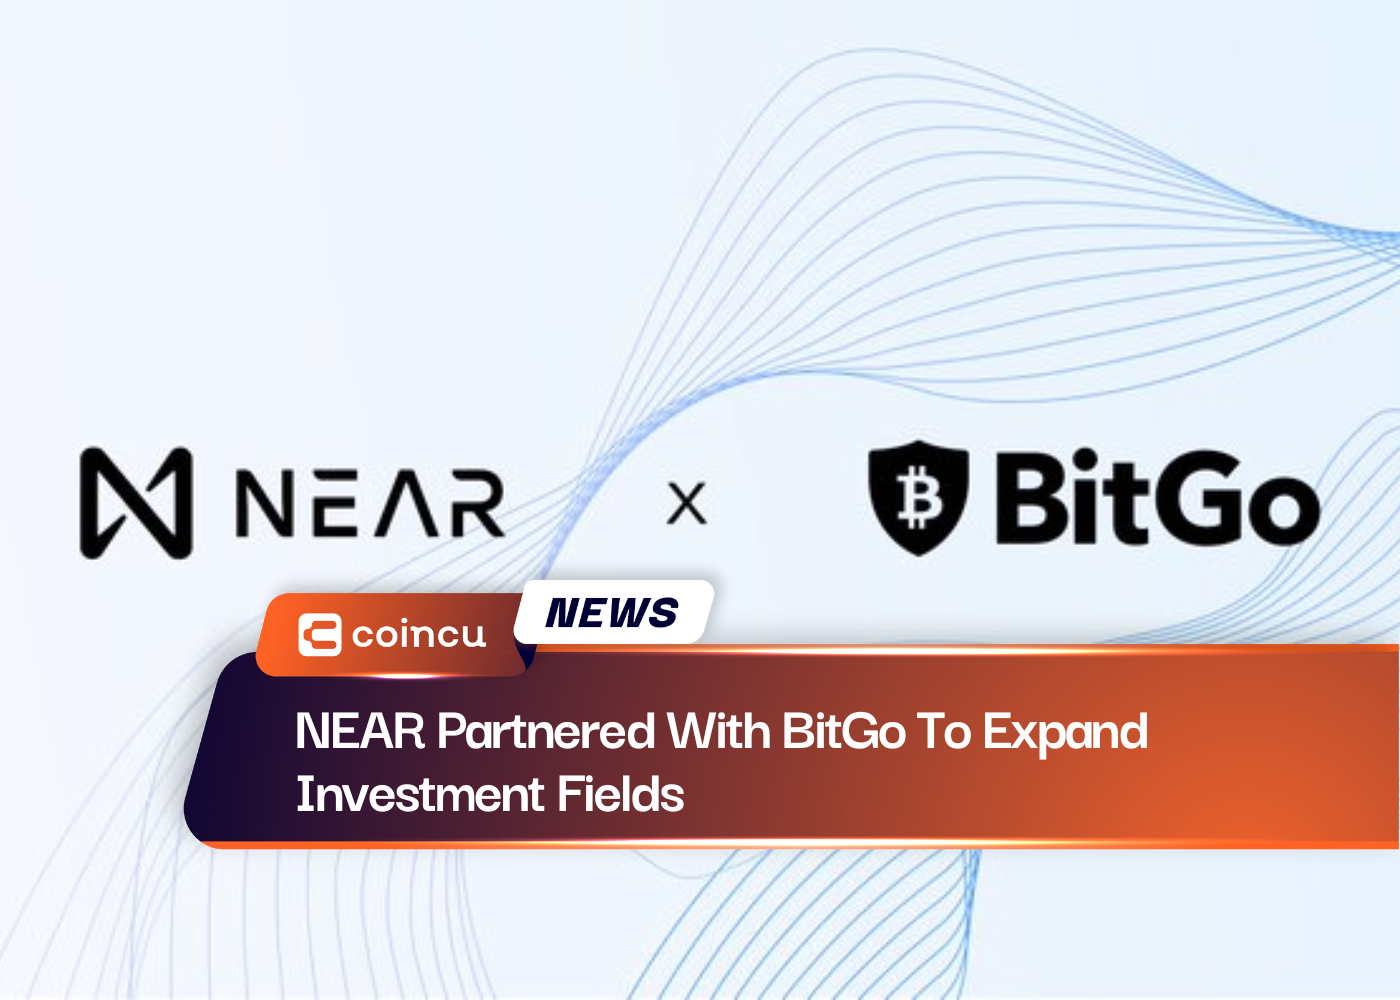 NEAR Partnered With BitGo To Expand Investment Fields